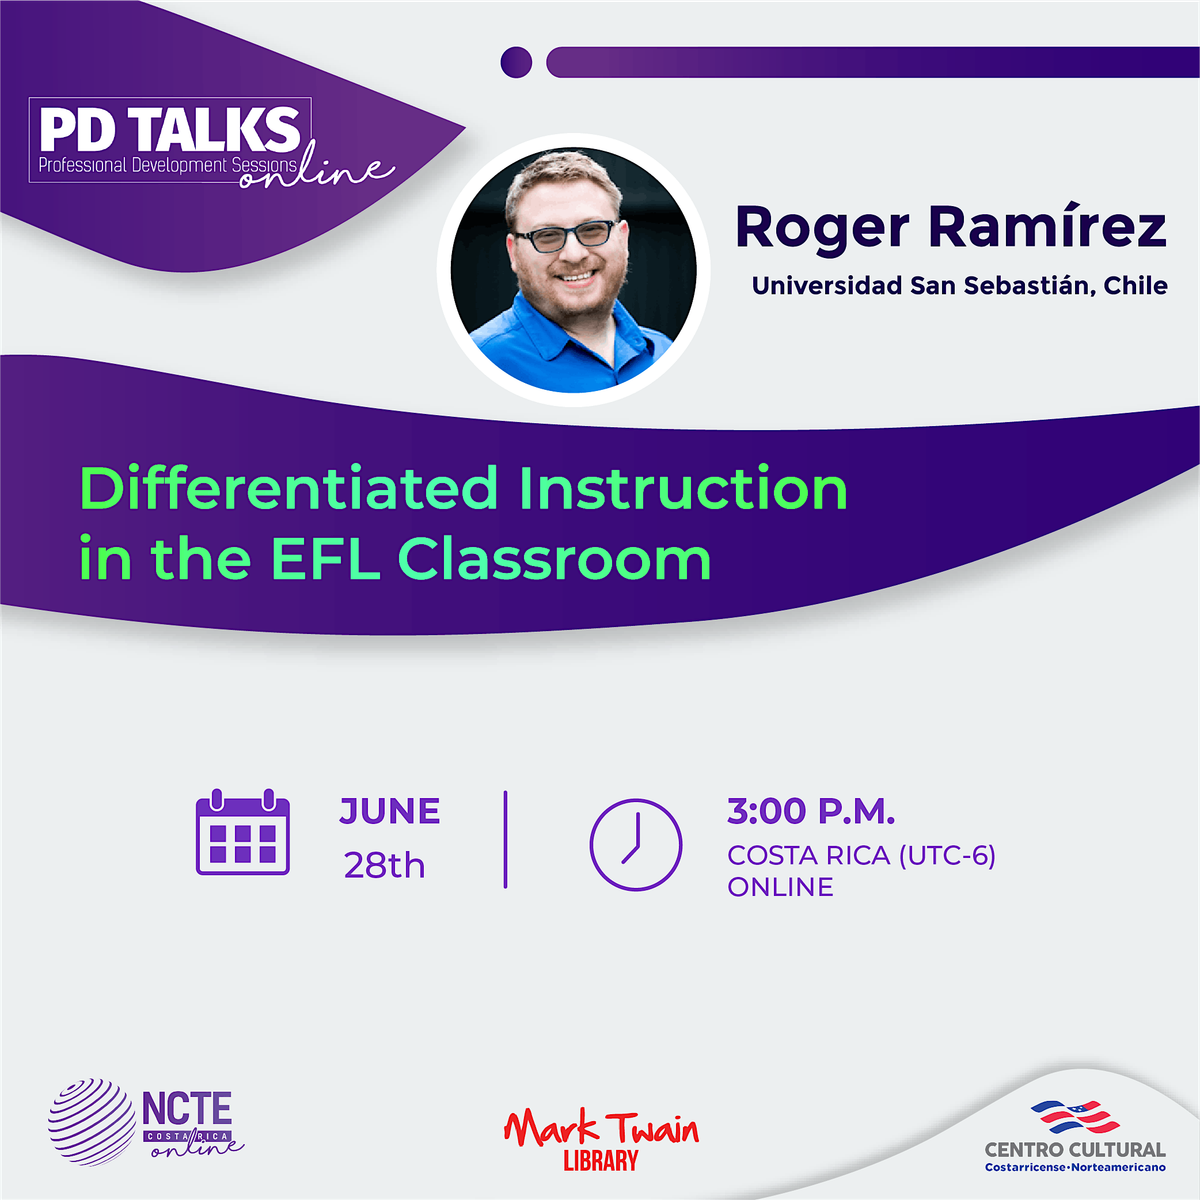 PD TALK: Differentiated Instruction in the EFL Classroom